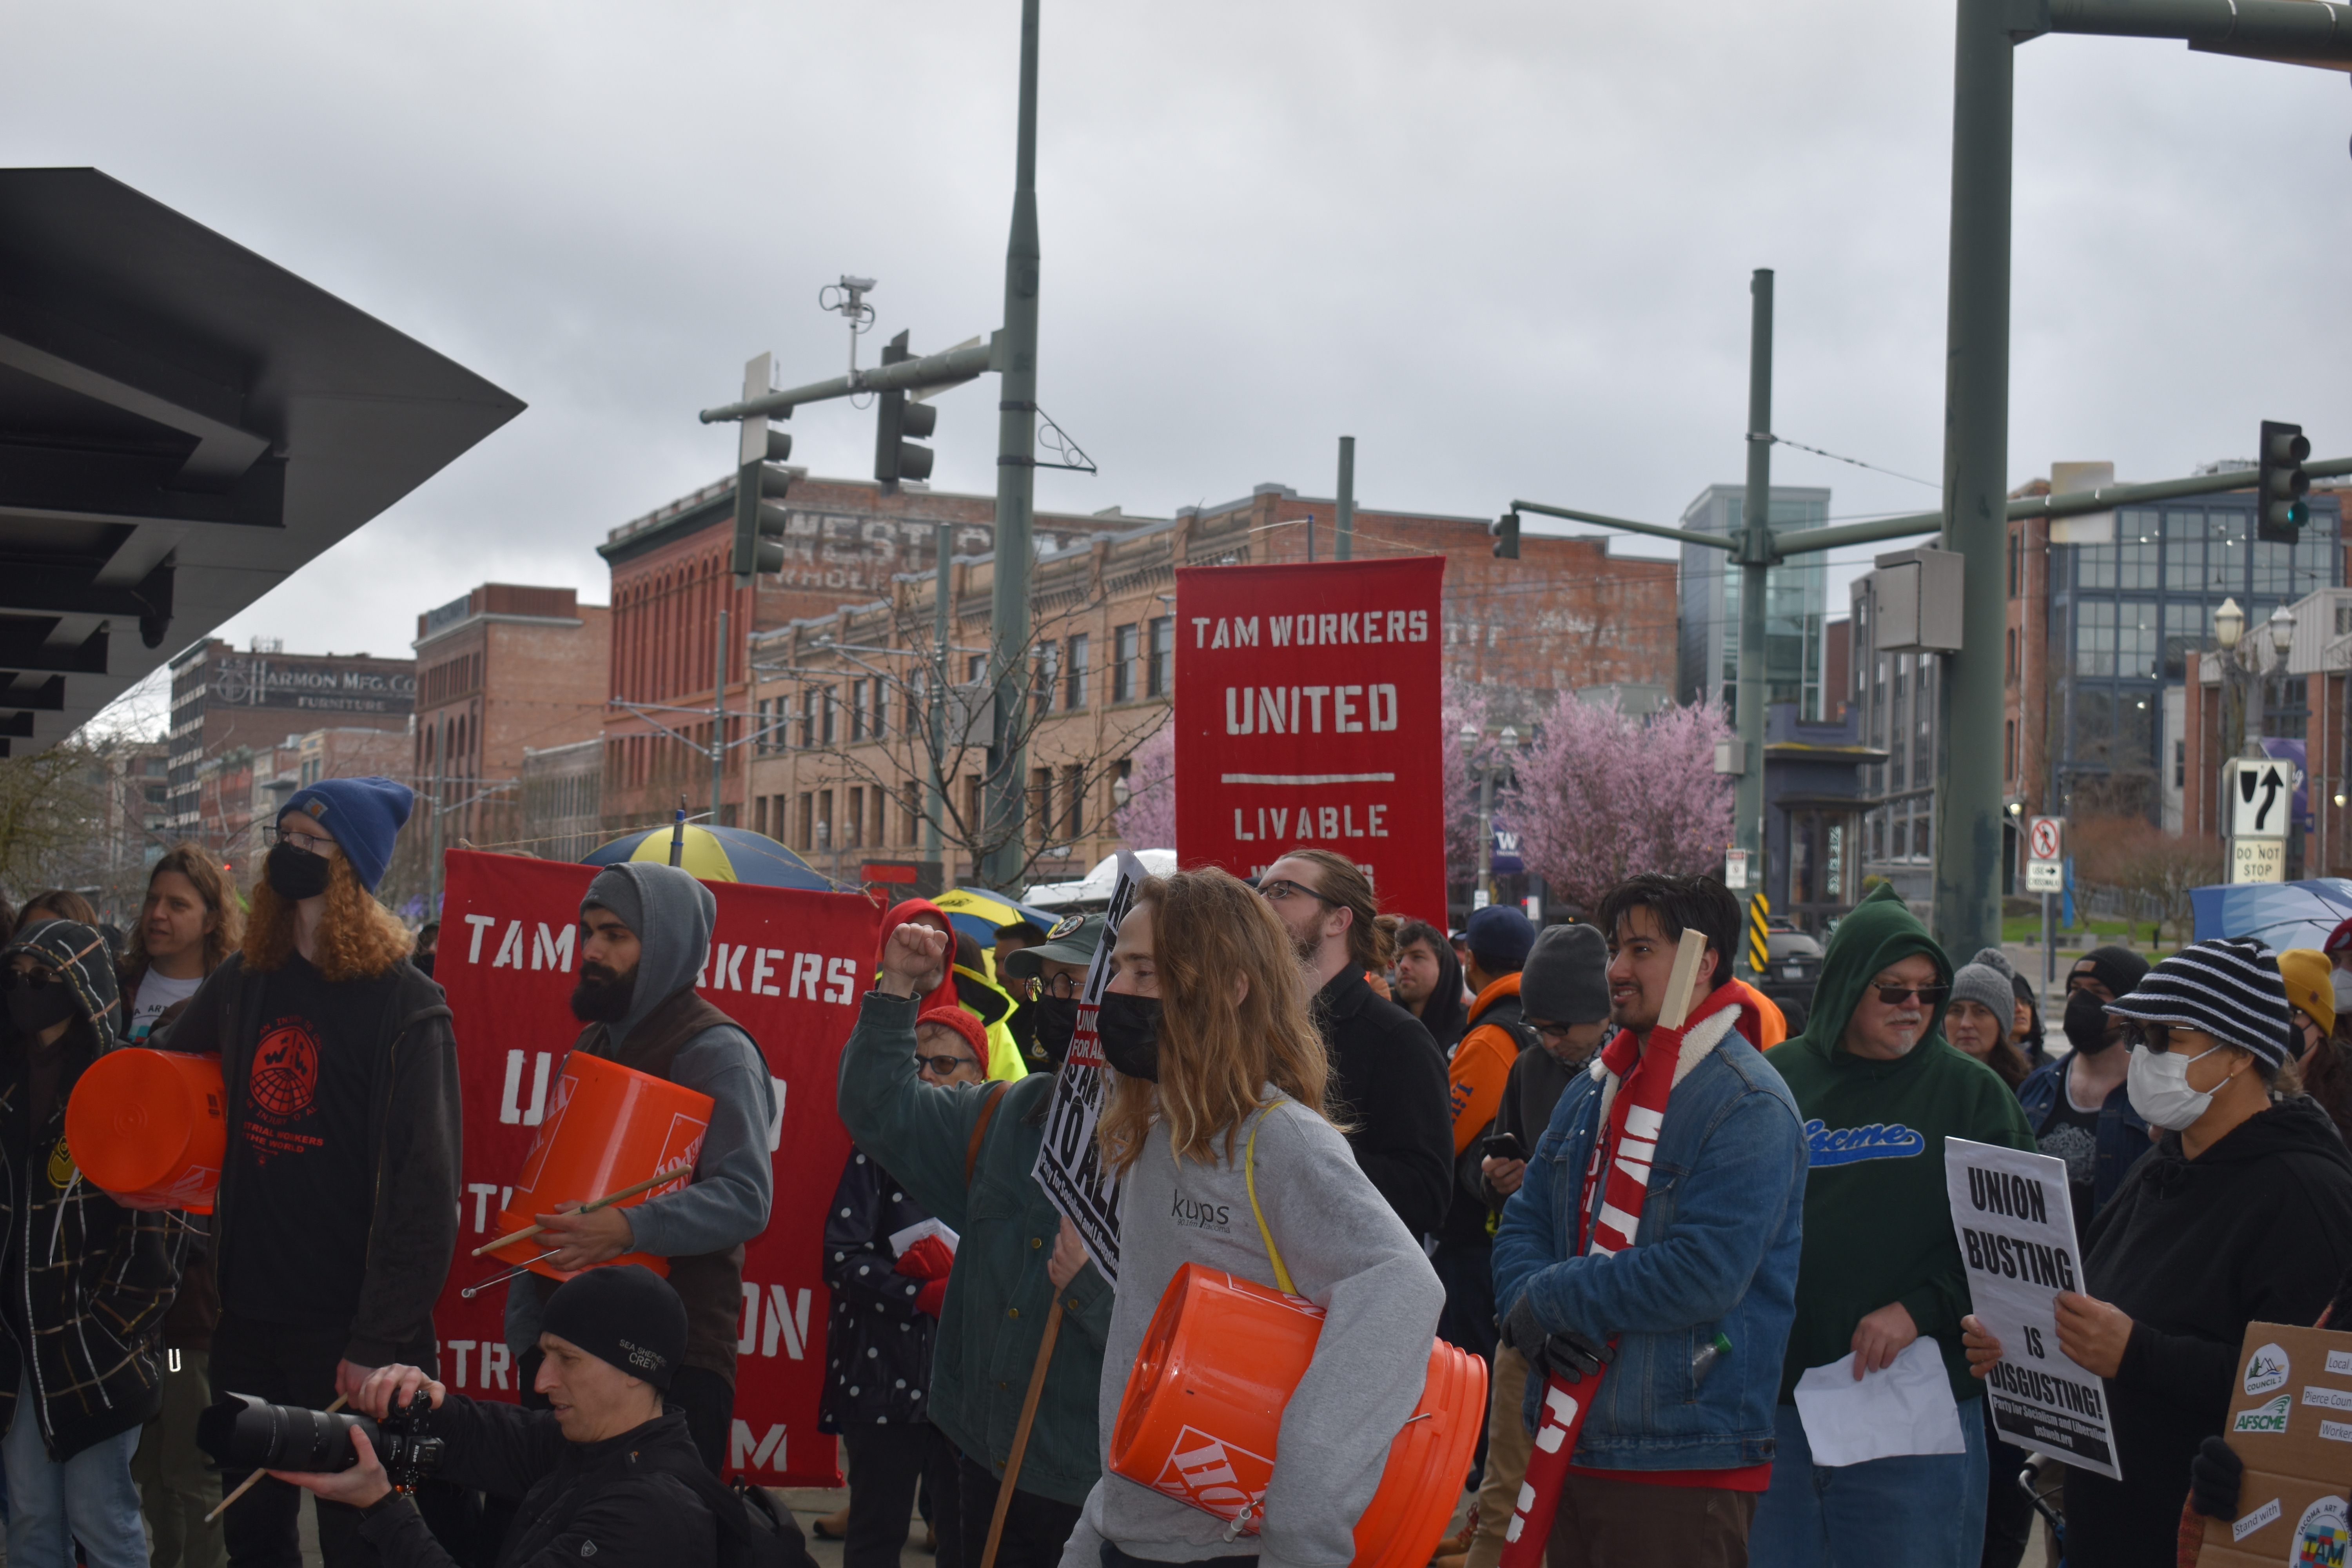 Employees are hoping unionization will lead to better pay and working conditions. Photo by Lauren Gallup.